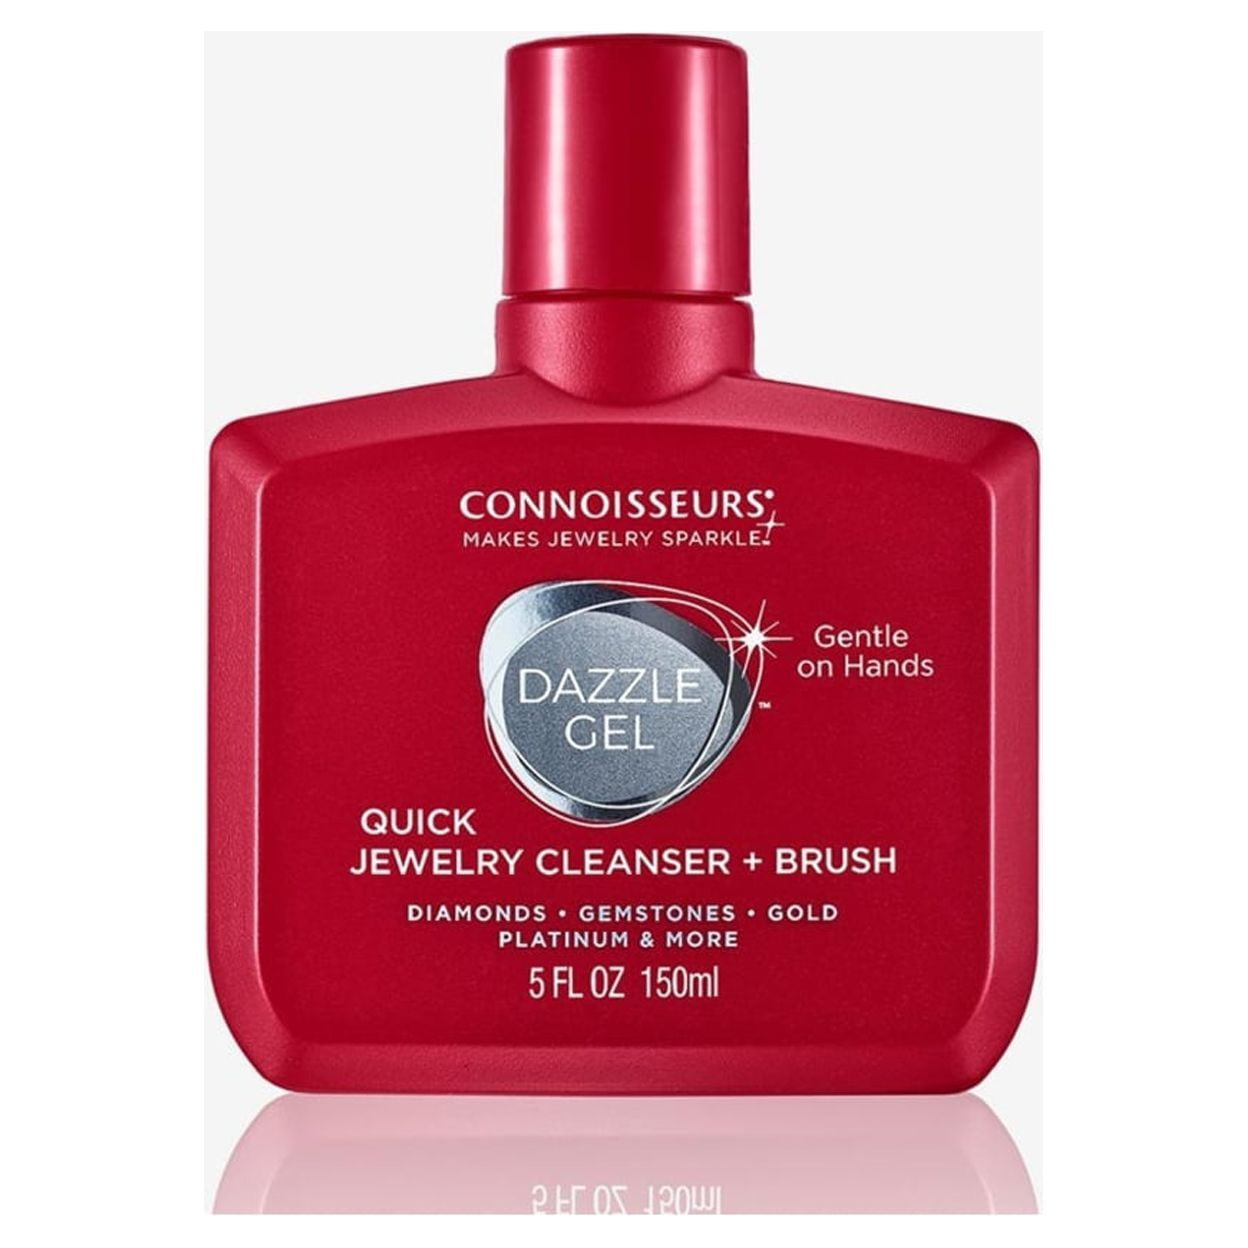 Connoisseurs Quick Jewelry Cleansing Gel 5 fl oz